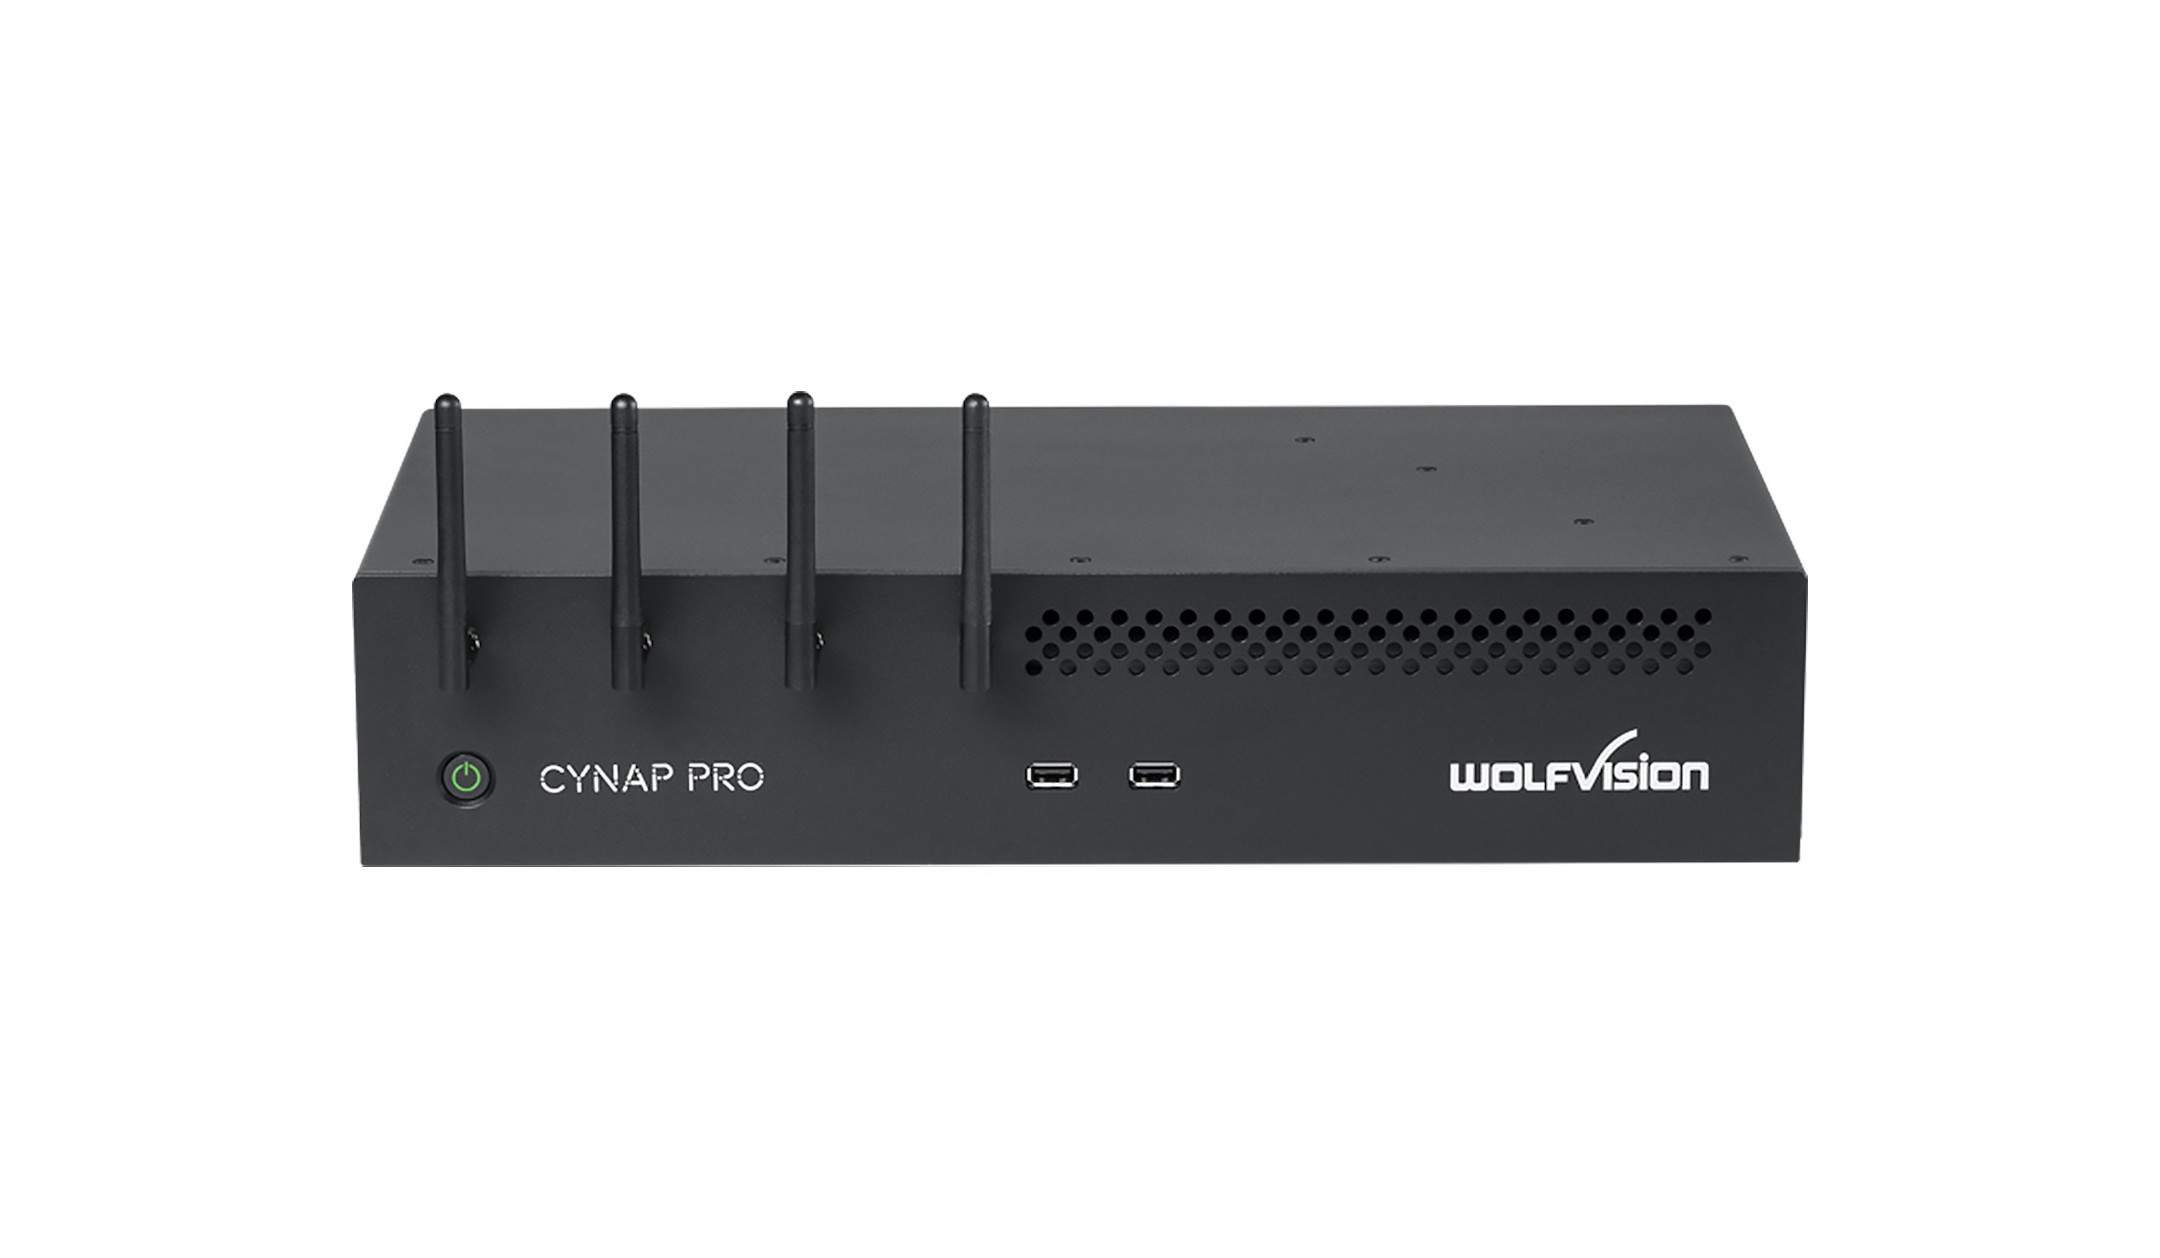 Wolfvision-Cynap-Pro-HDMI-HDBaseT-IN-Version-B-drahtloses-All-in-One-Prasentationssystem